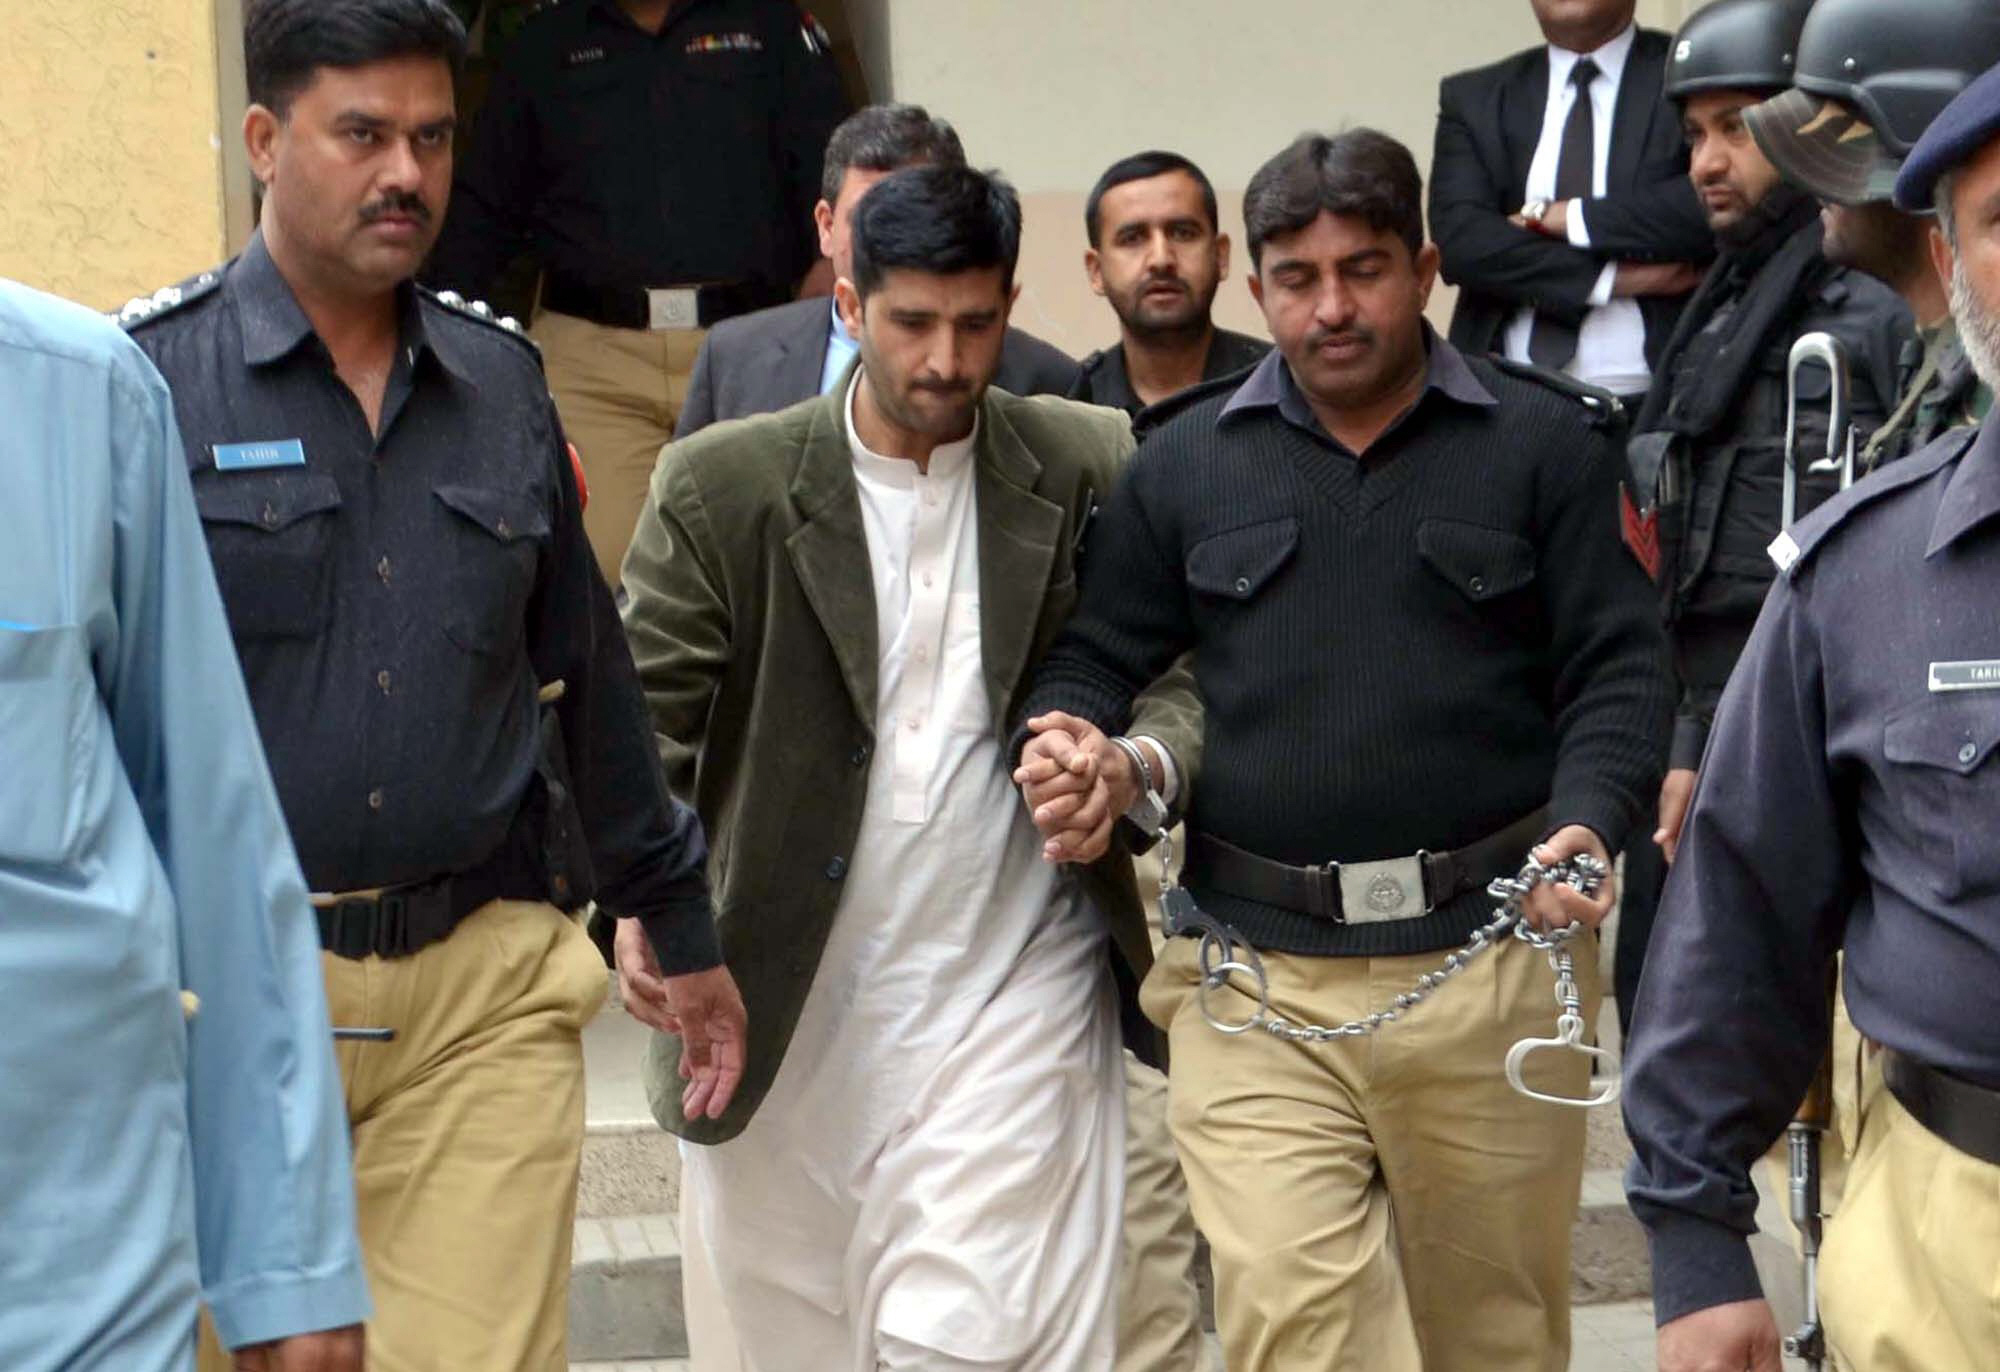 police personnel escort accused junaid shehzad out of the court premises photo express